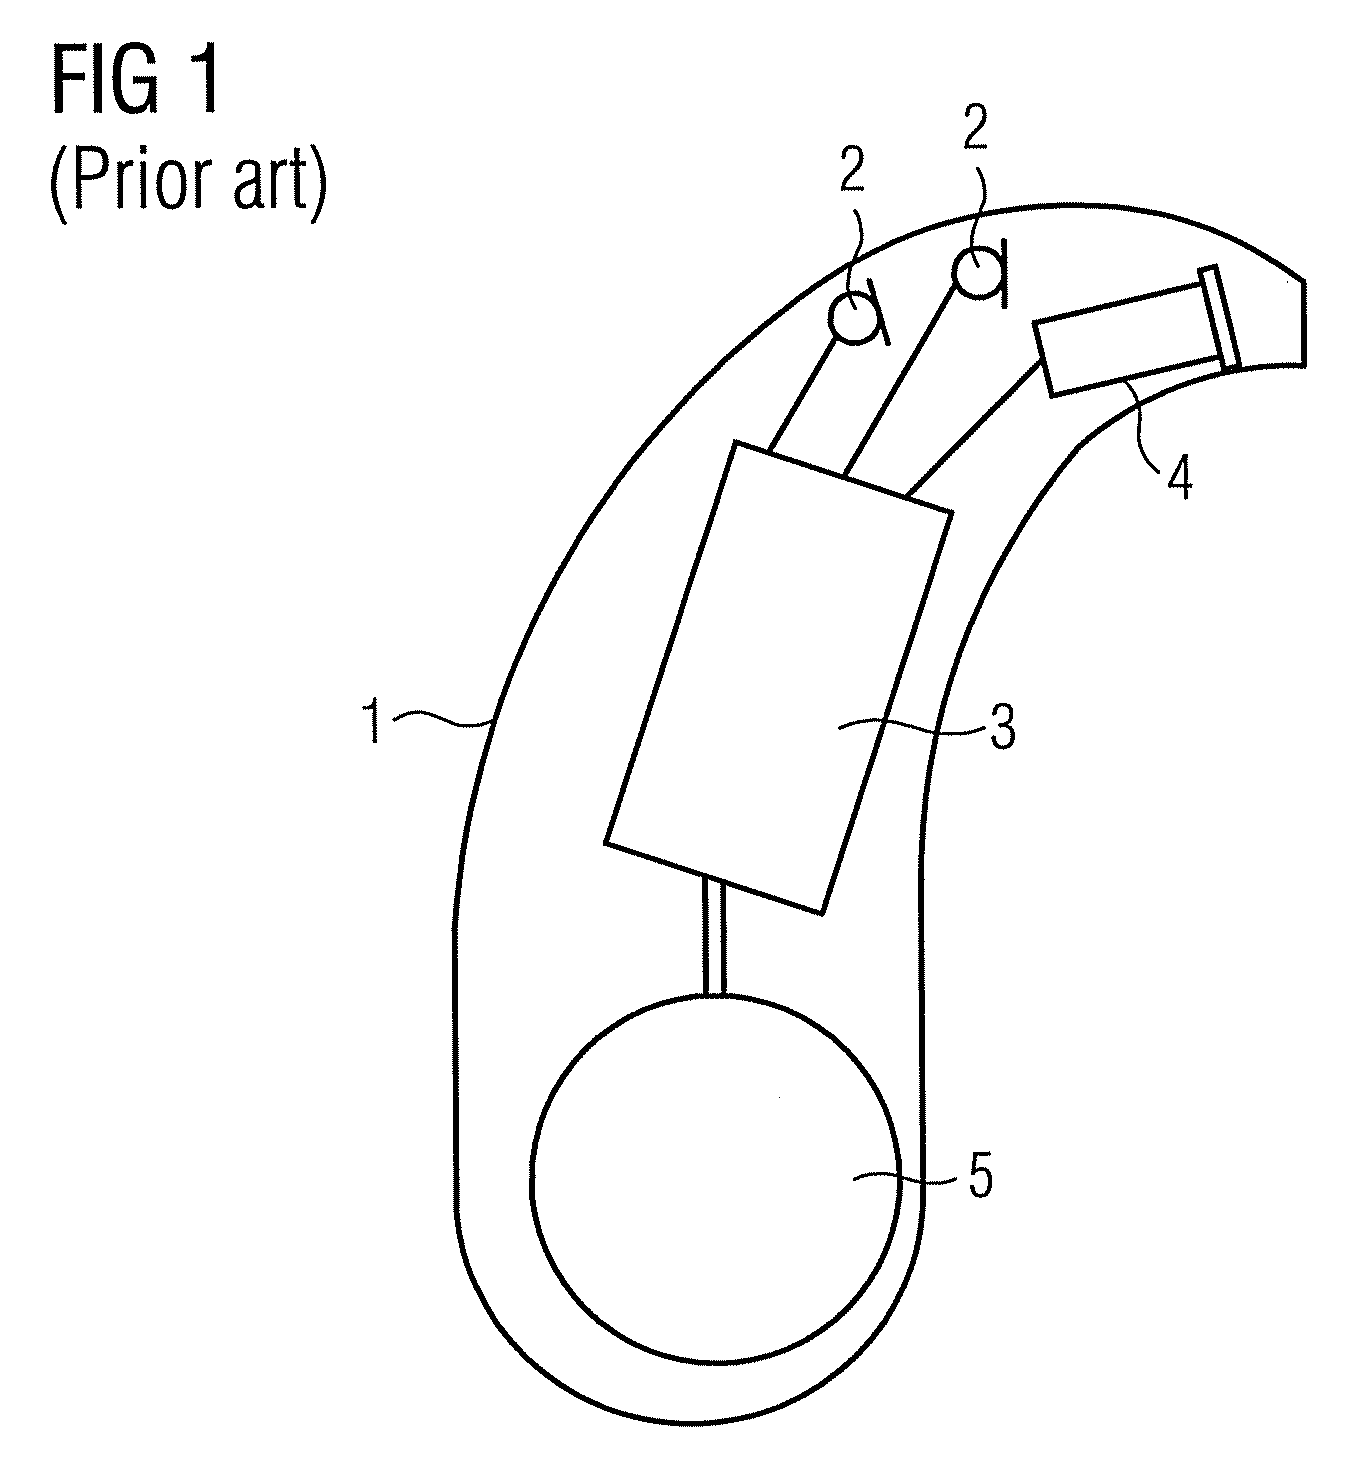 Filter bank system for hearing aids